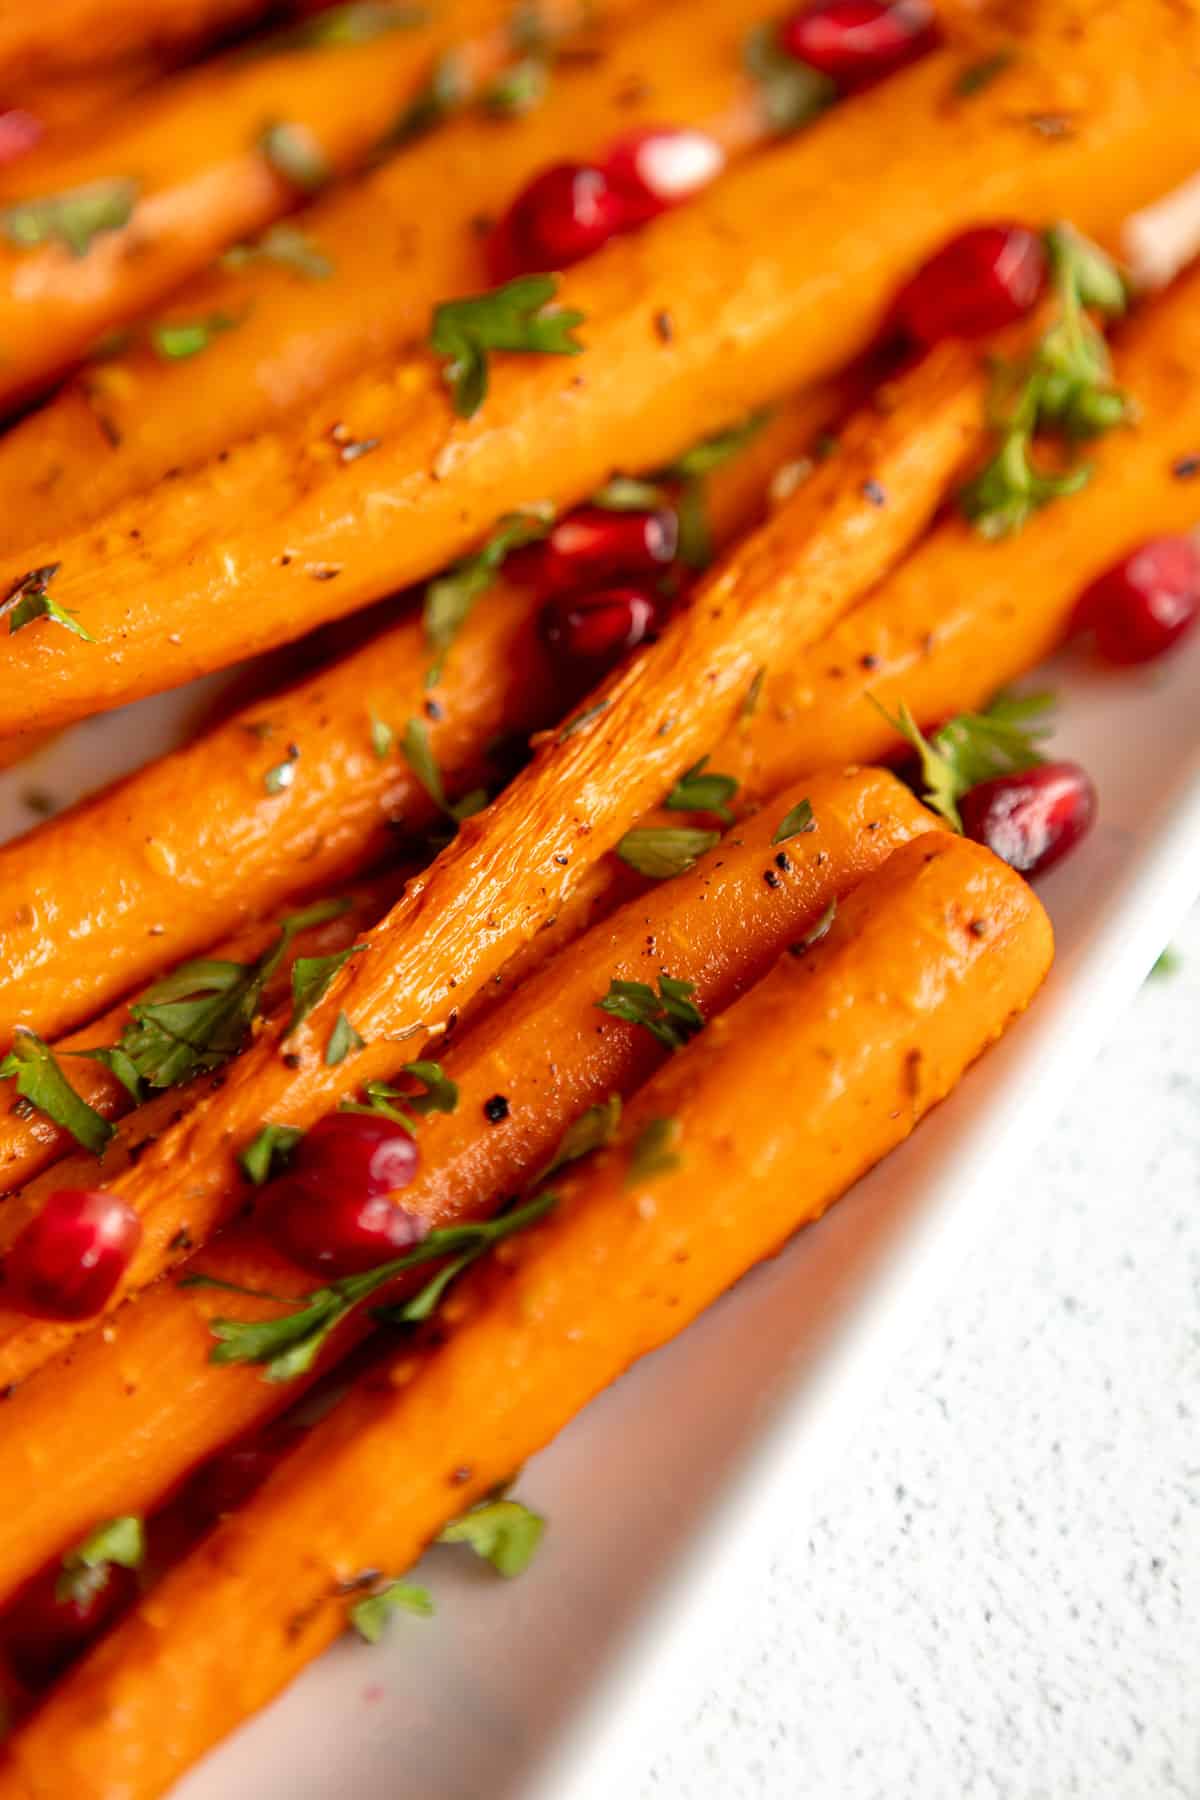 up close image of the air fryer carrots